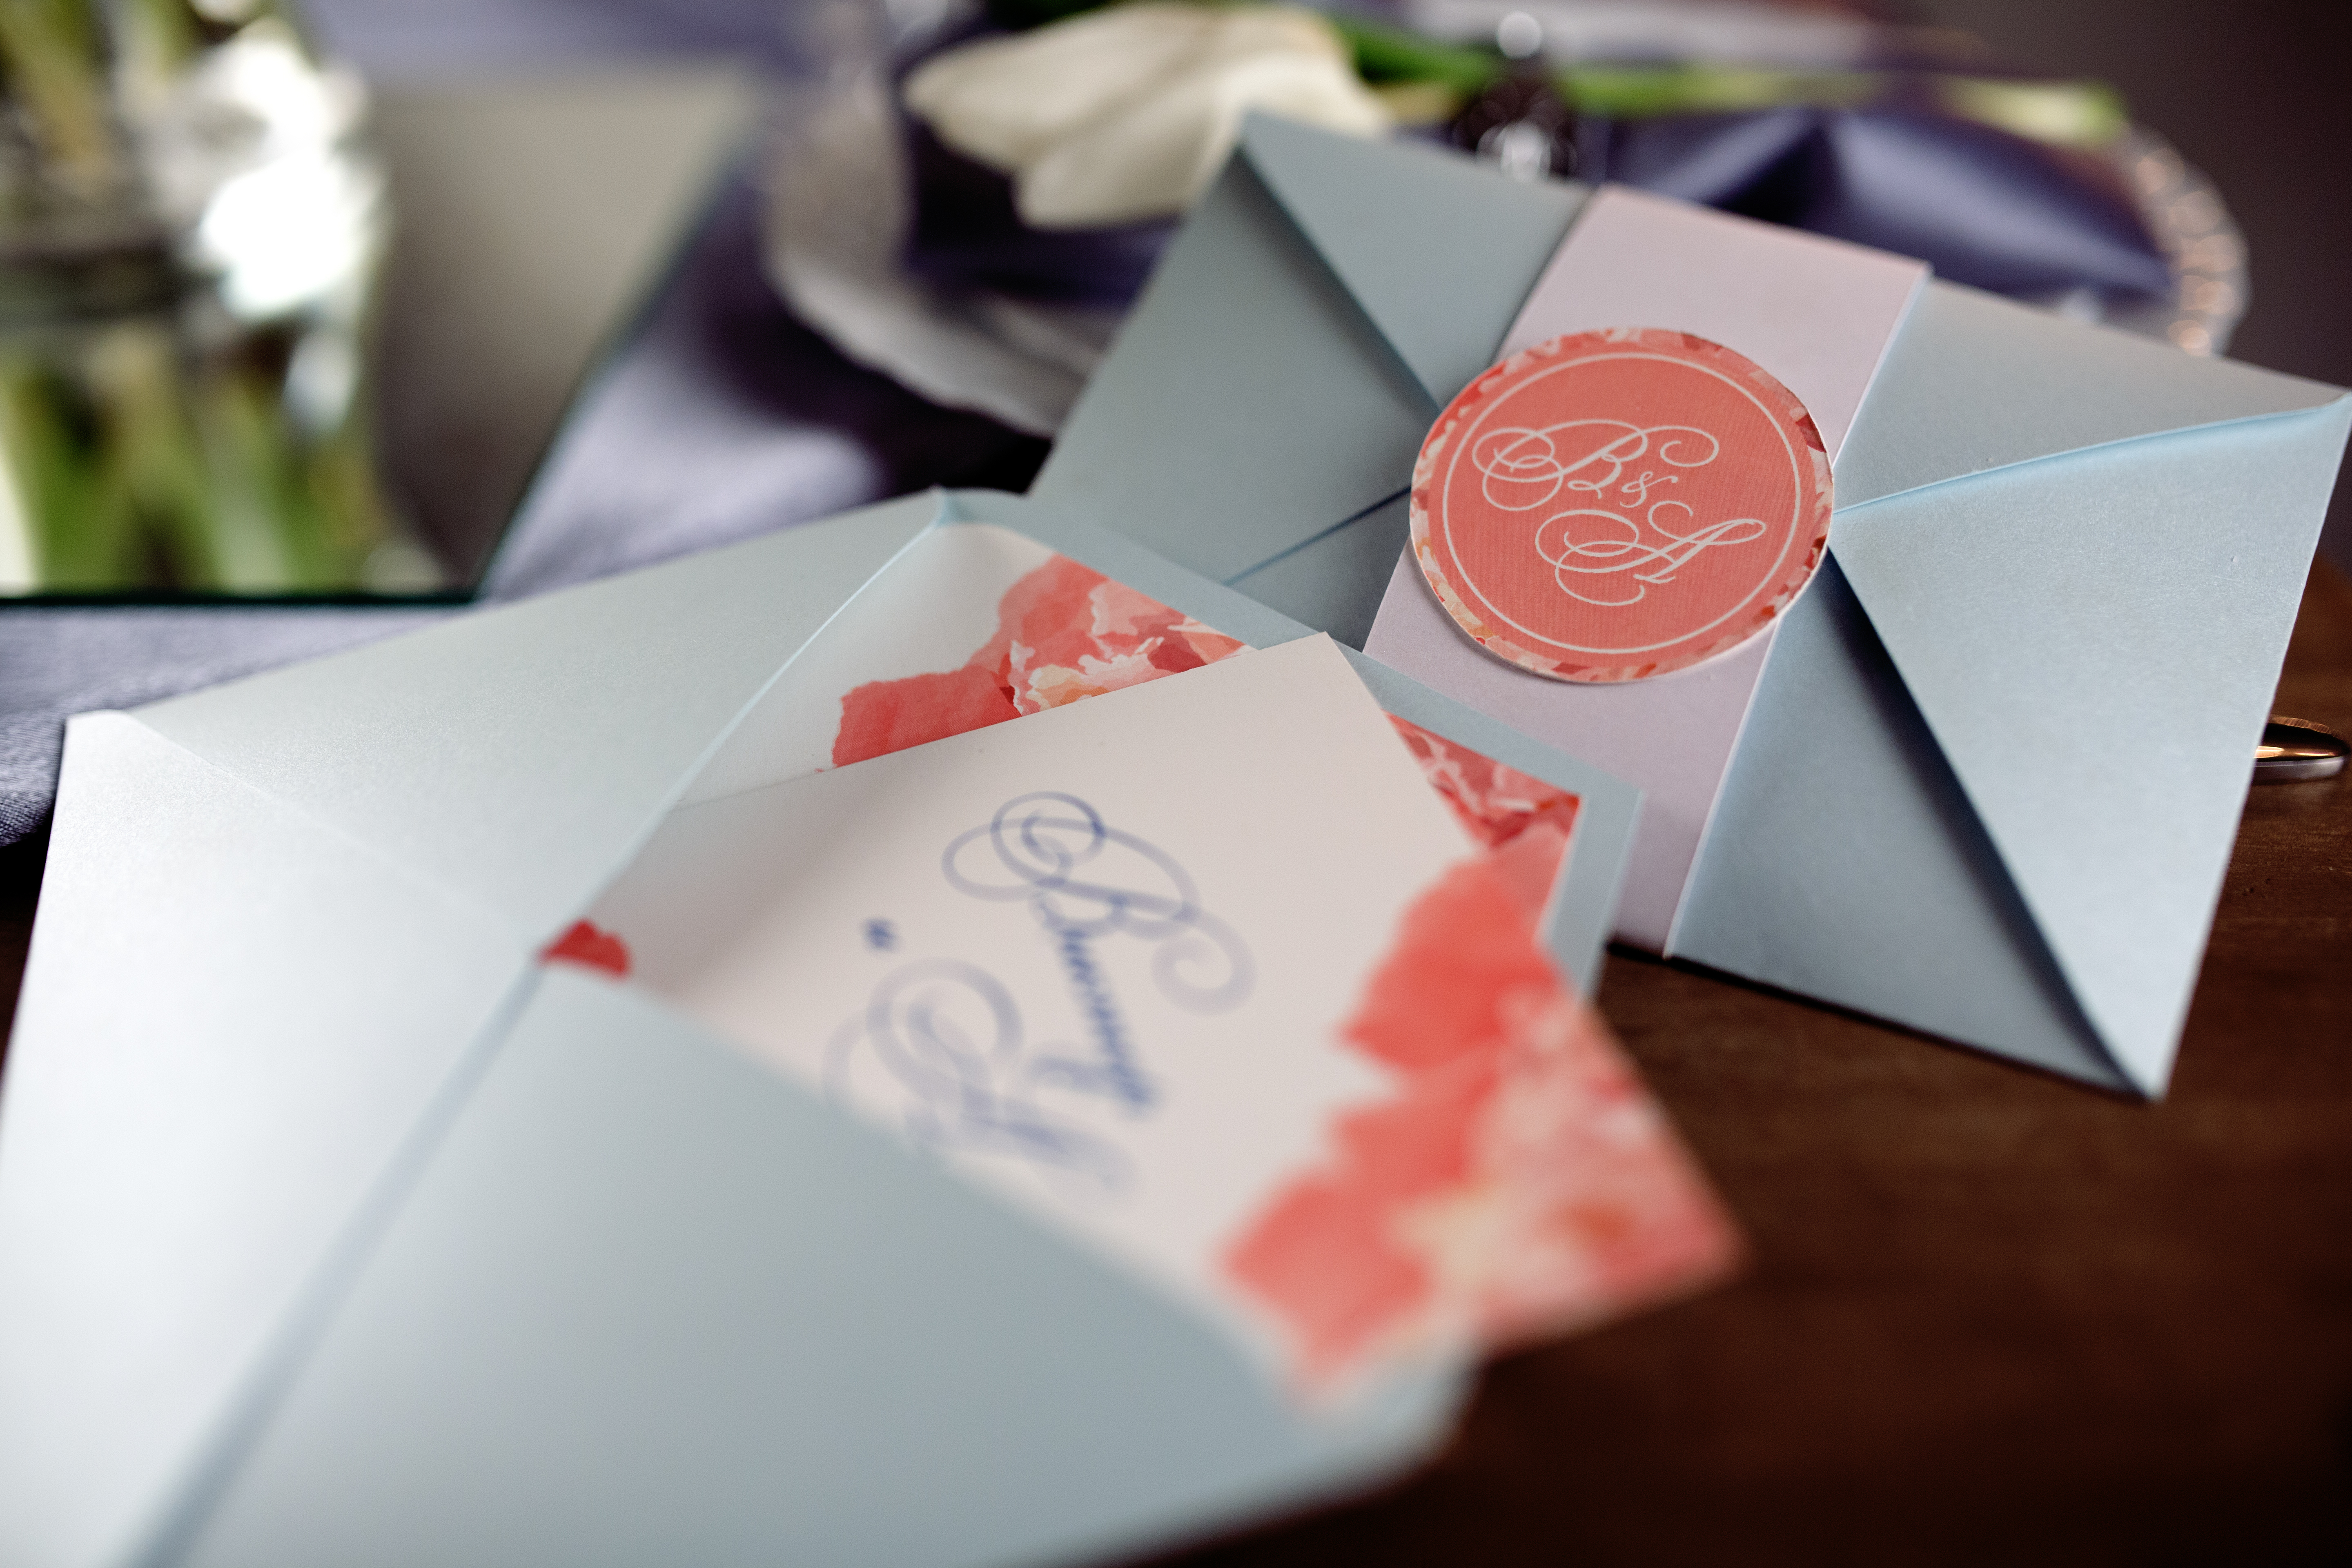 Envelopes containing wedding invitations | Source: Shutterstock